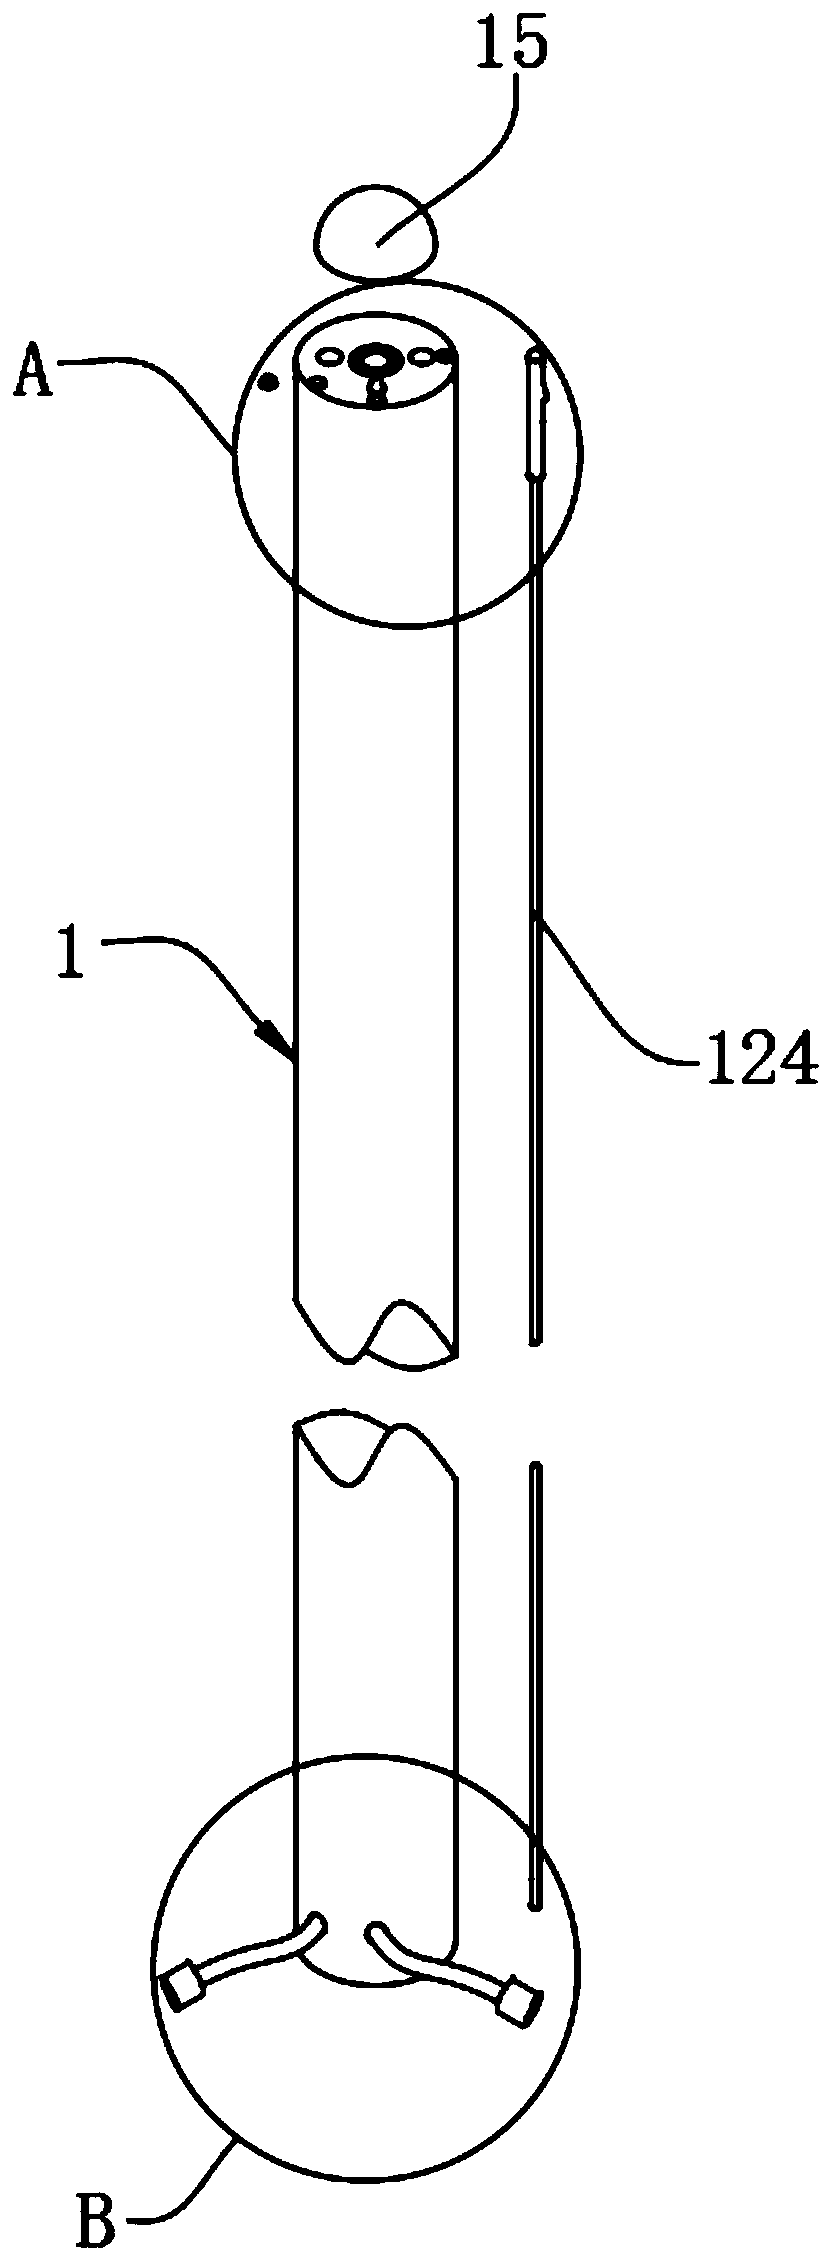 Endoscopic tumor detection carrier device